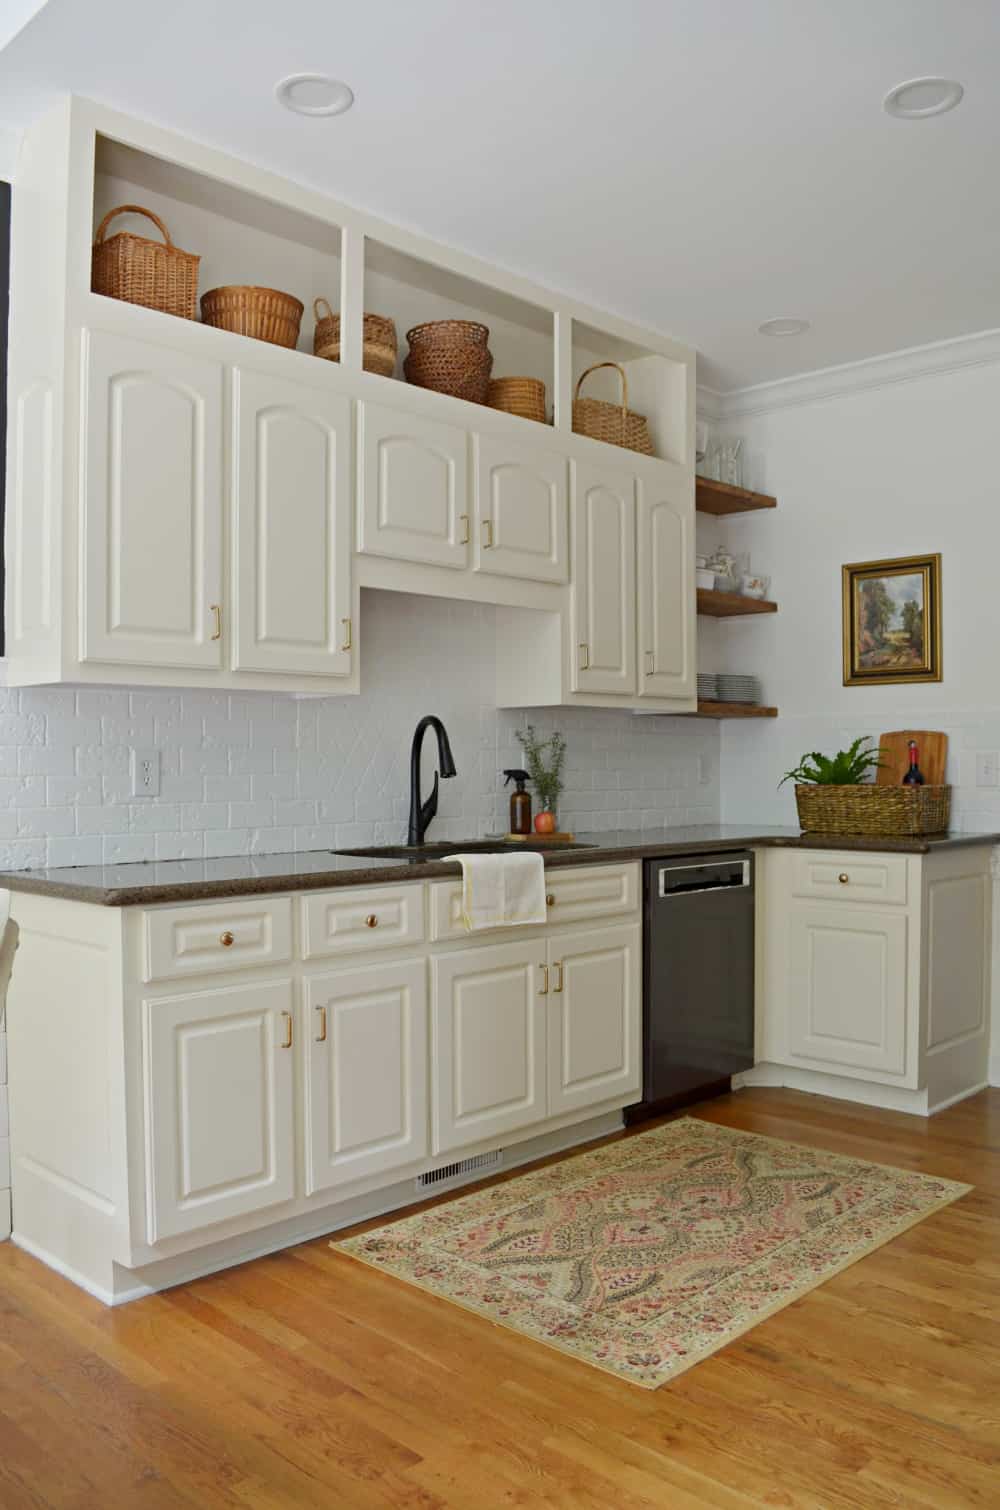 Kitchen Makeover Reveal home renovation project after